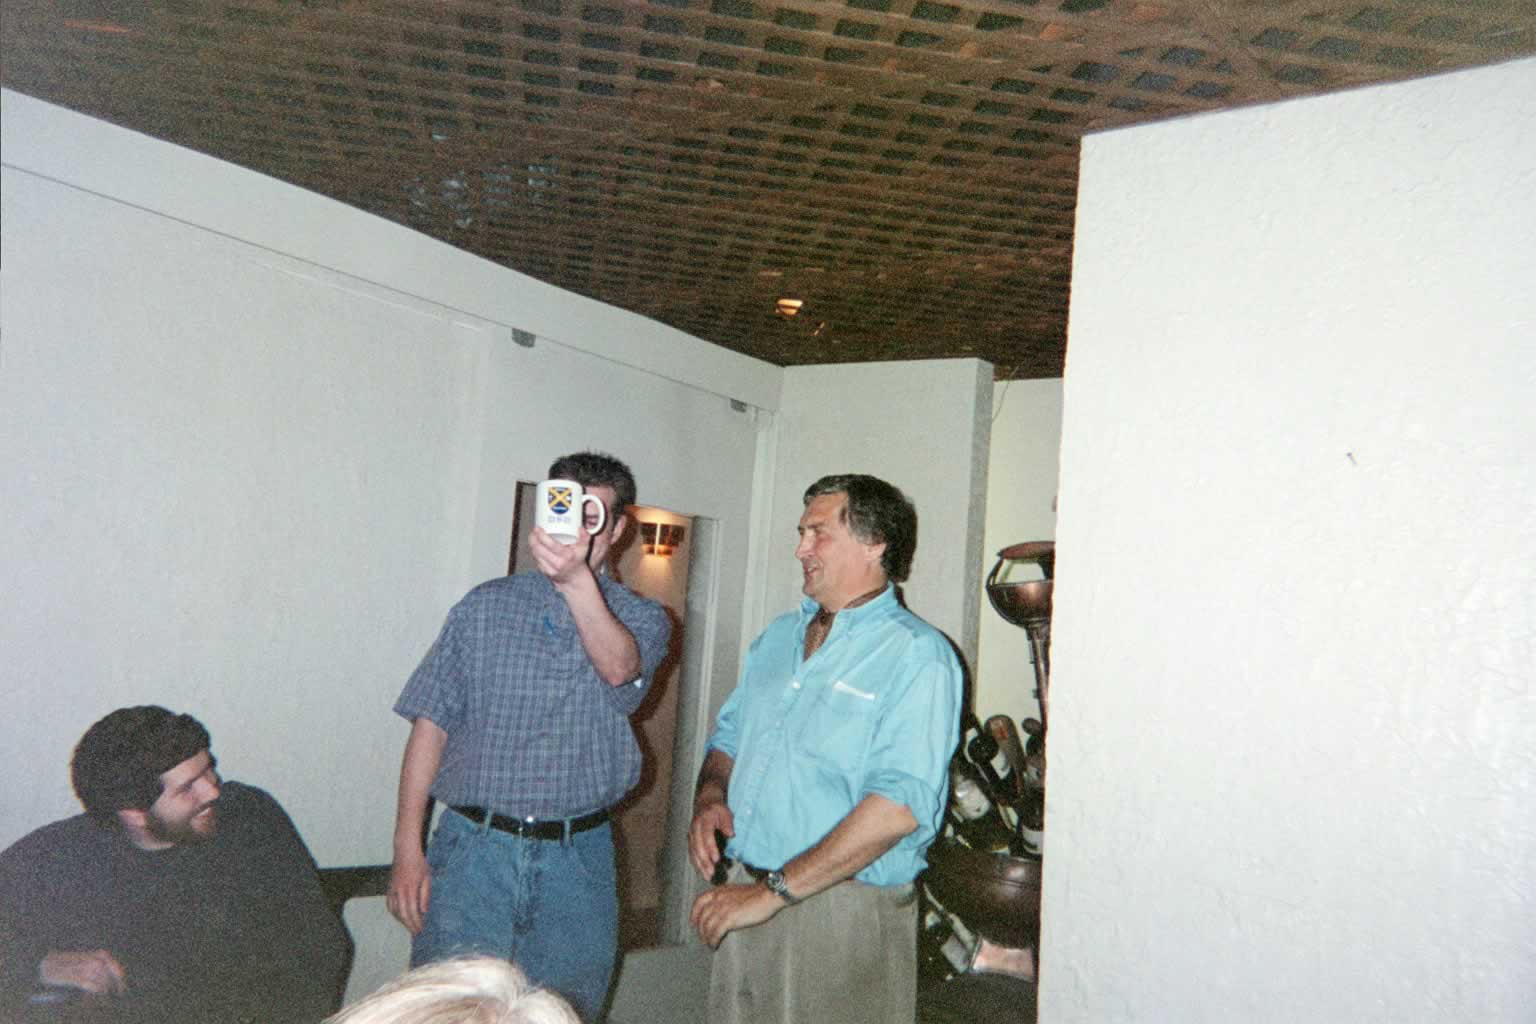 picture of Paul Marshall standing next to a man holding a mug in front of his face